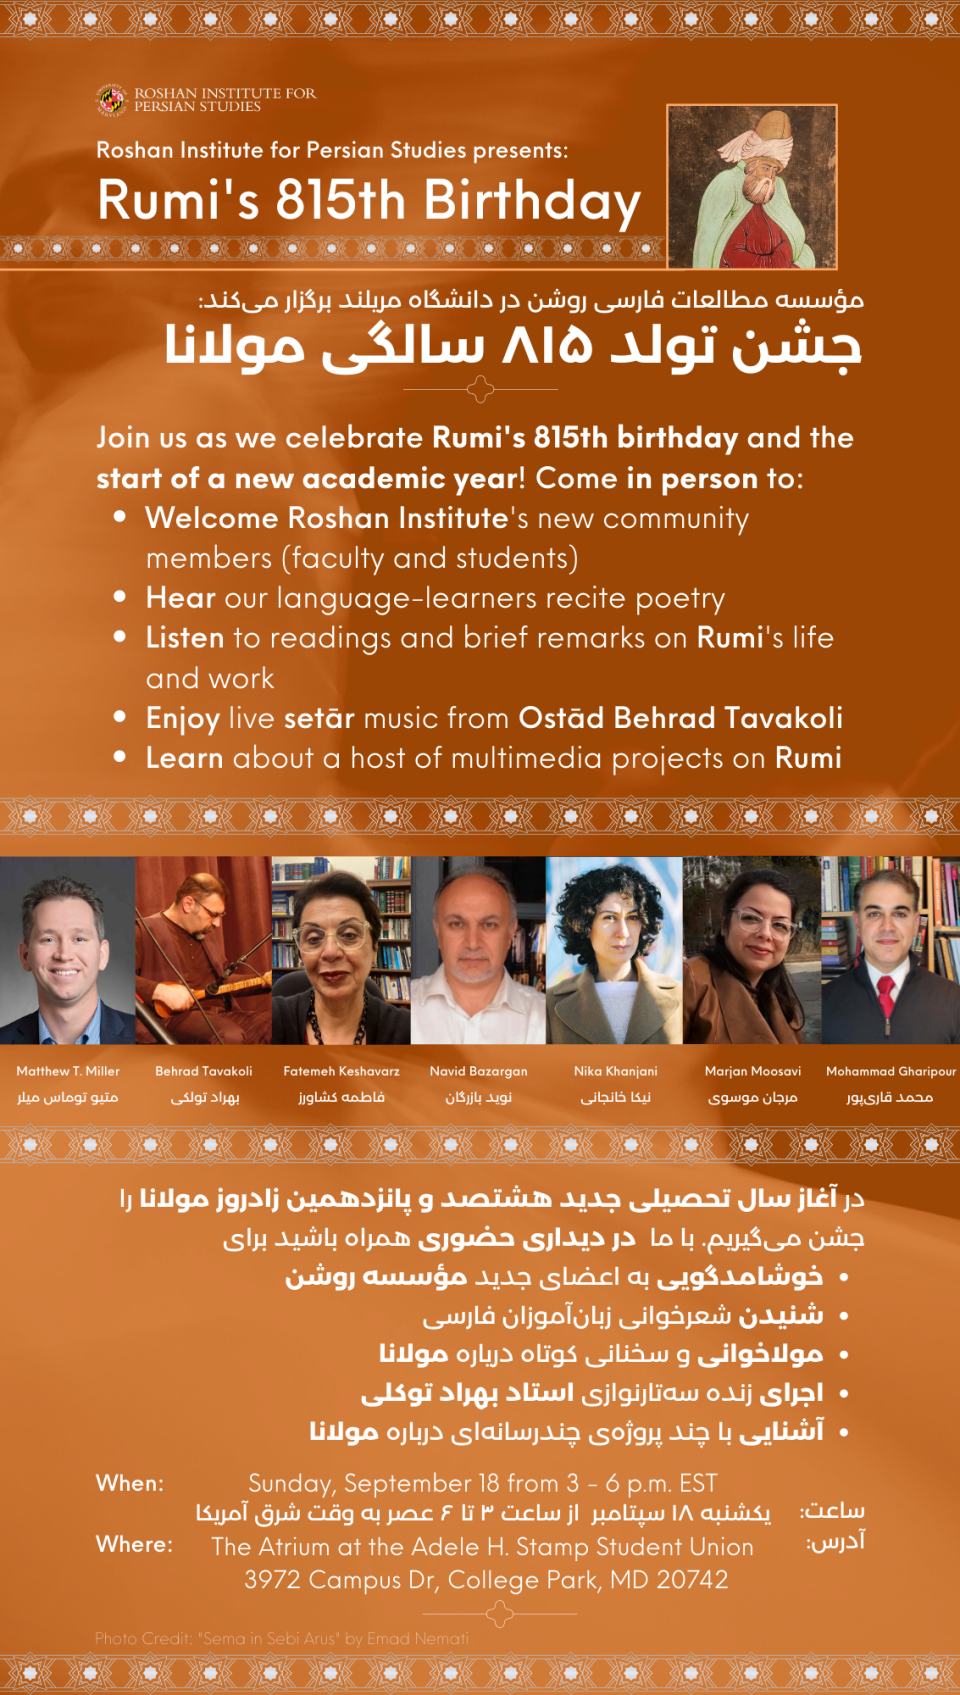 The full poster for the Rumi event